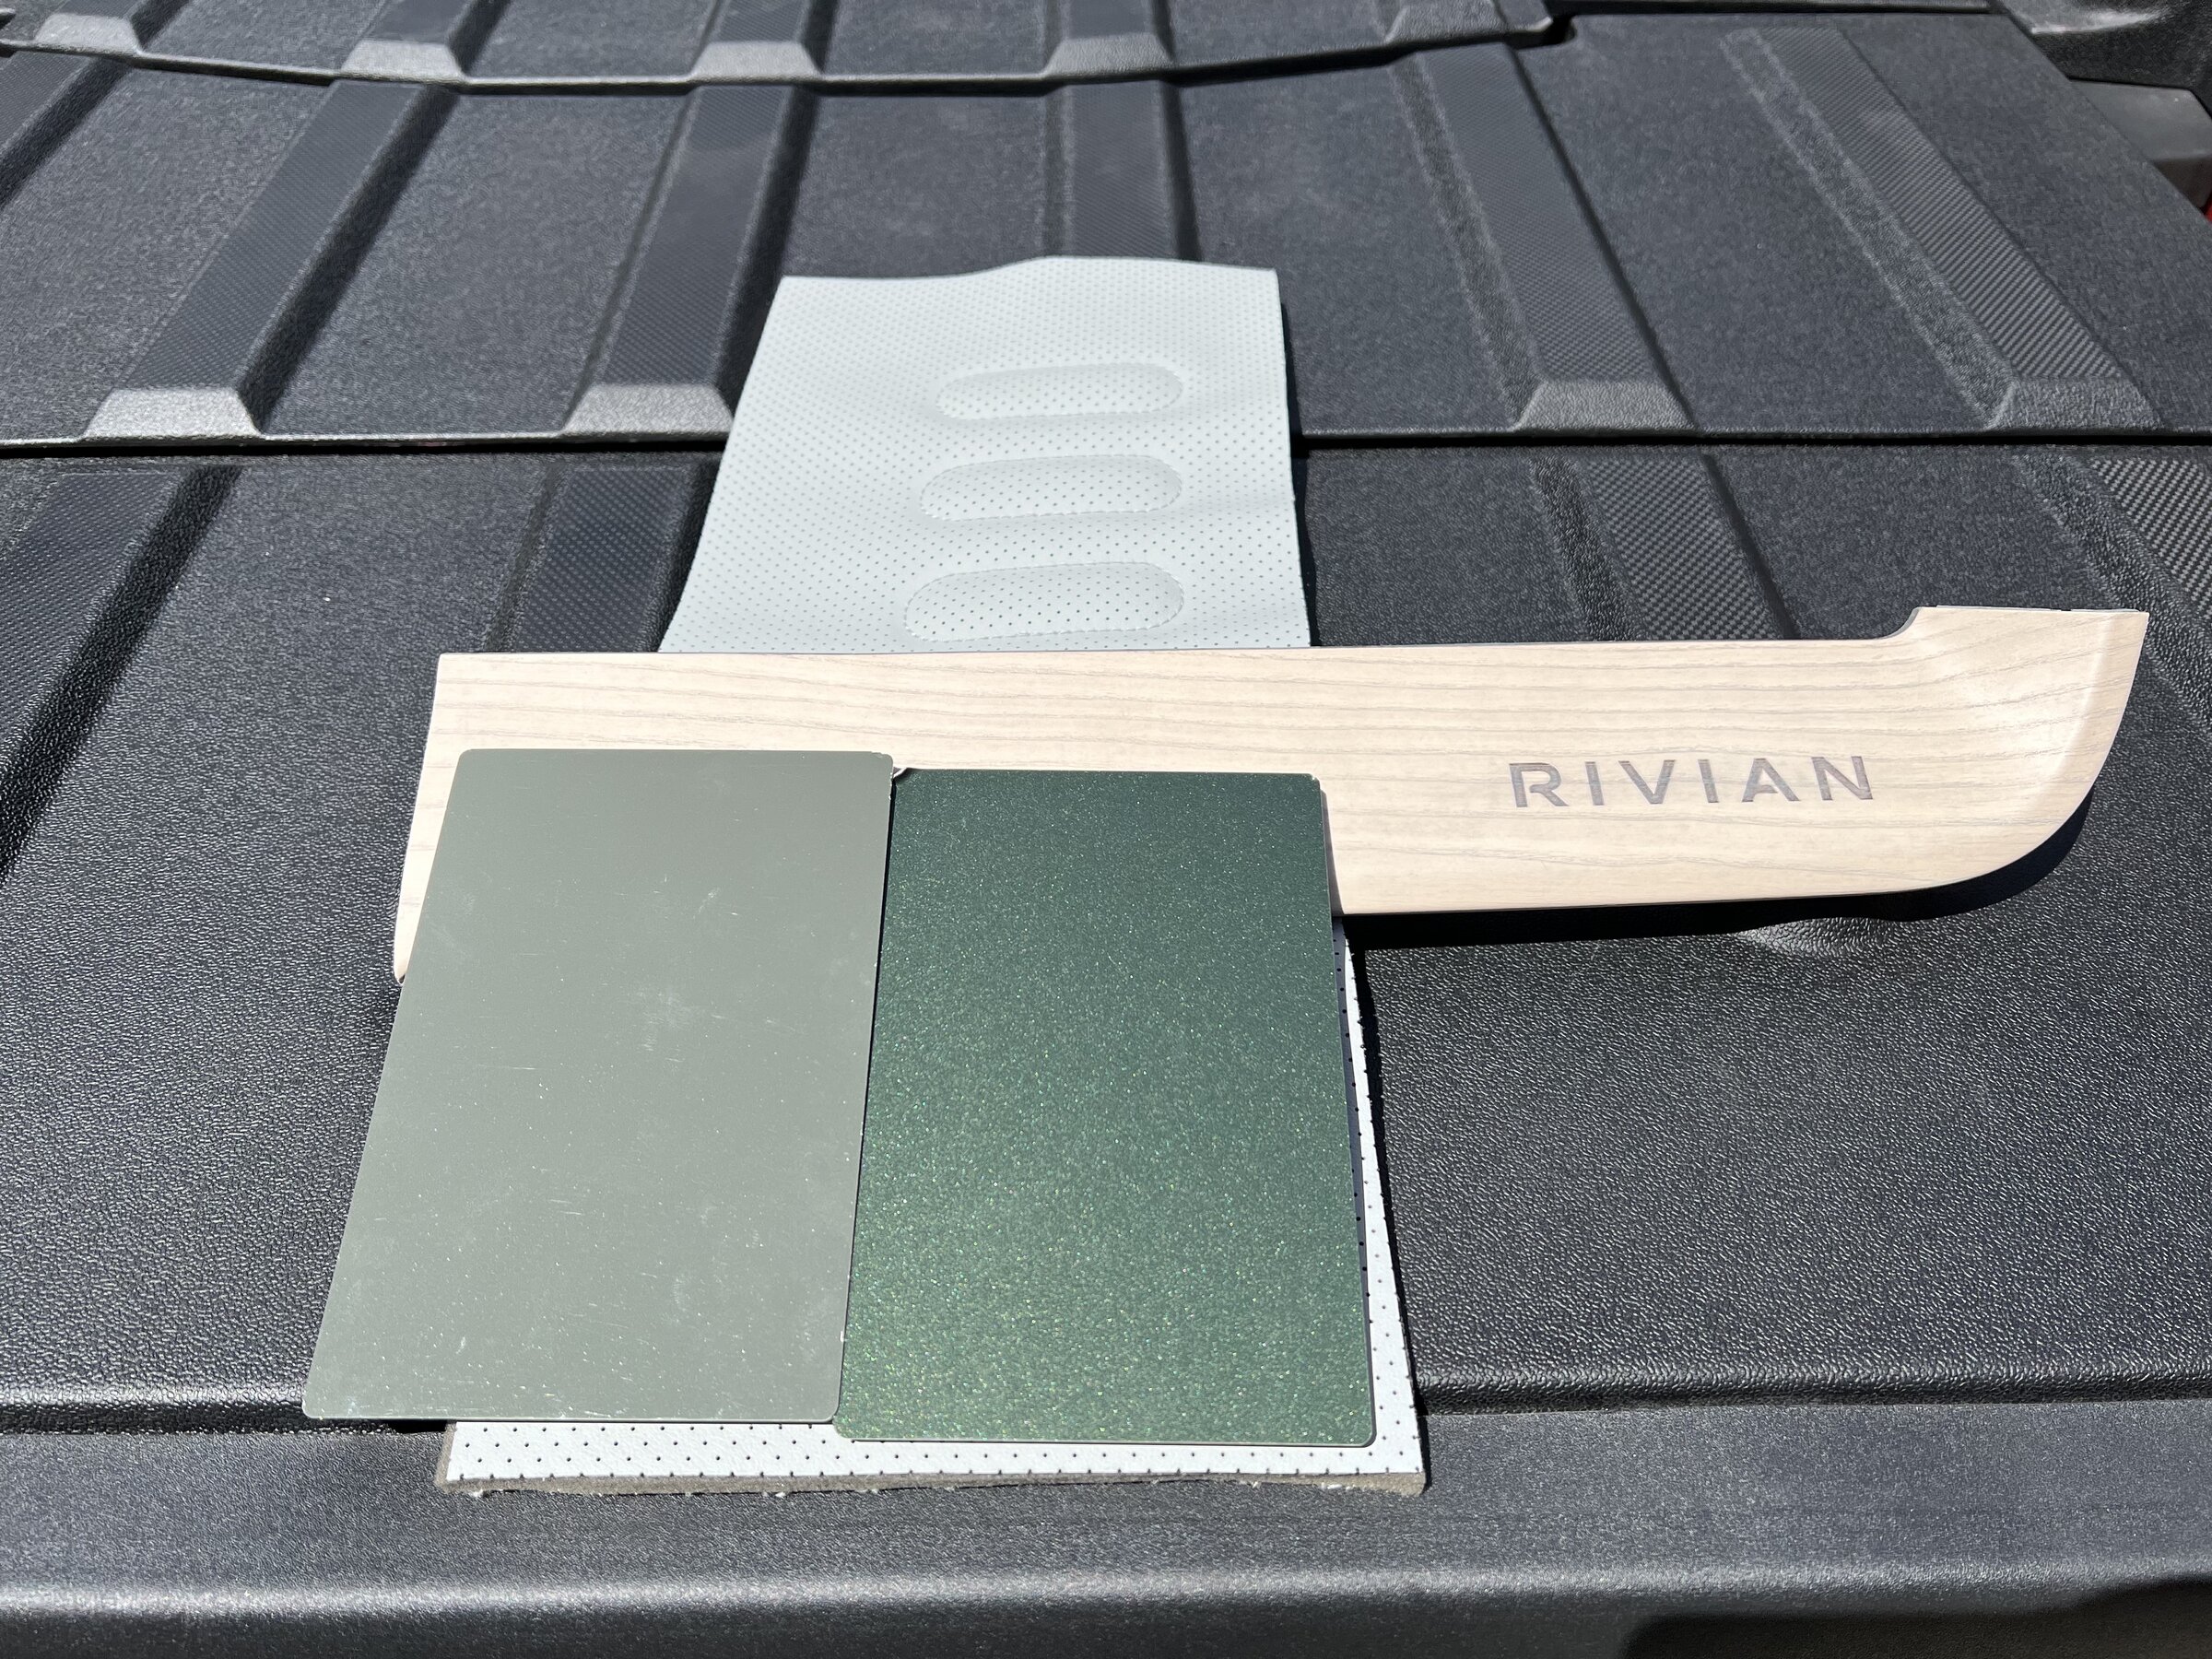 Rivian R1T R1S Forest Edge interior + other photos from Rivian Venice Hub IMG_1972